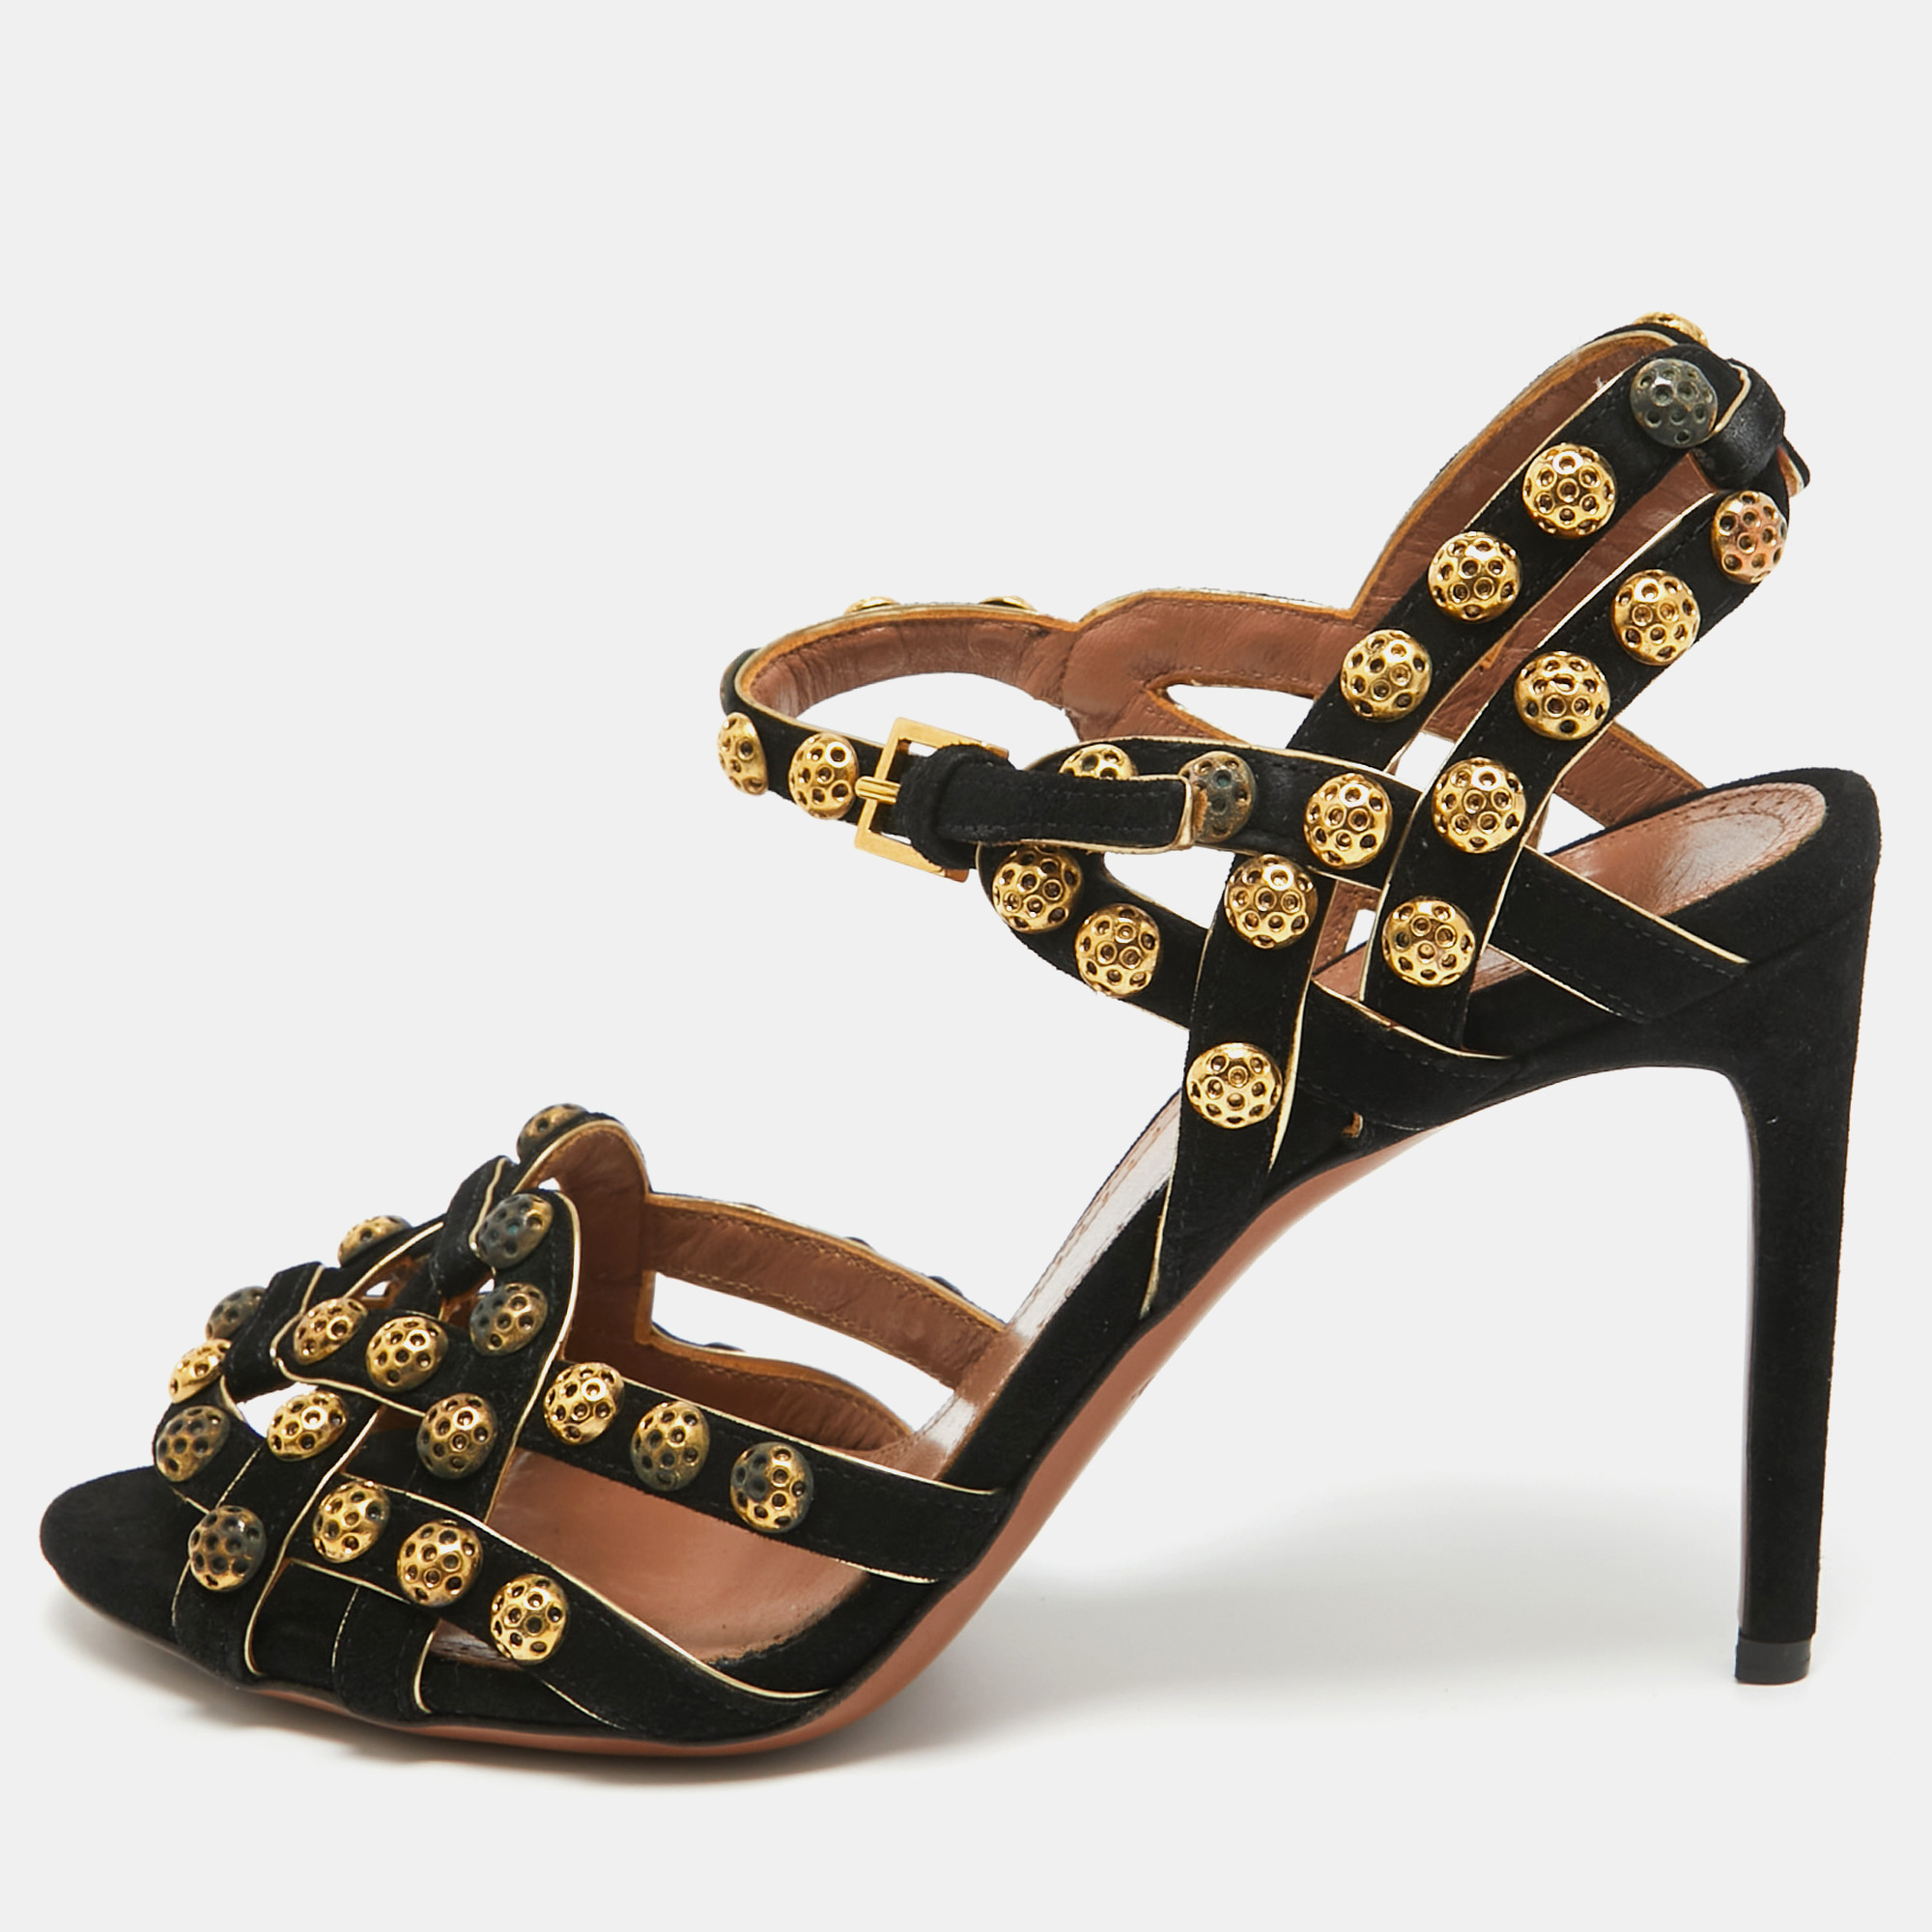 Alaia black suede studded ankle strap sandals size 40